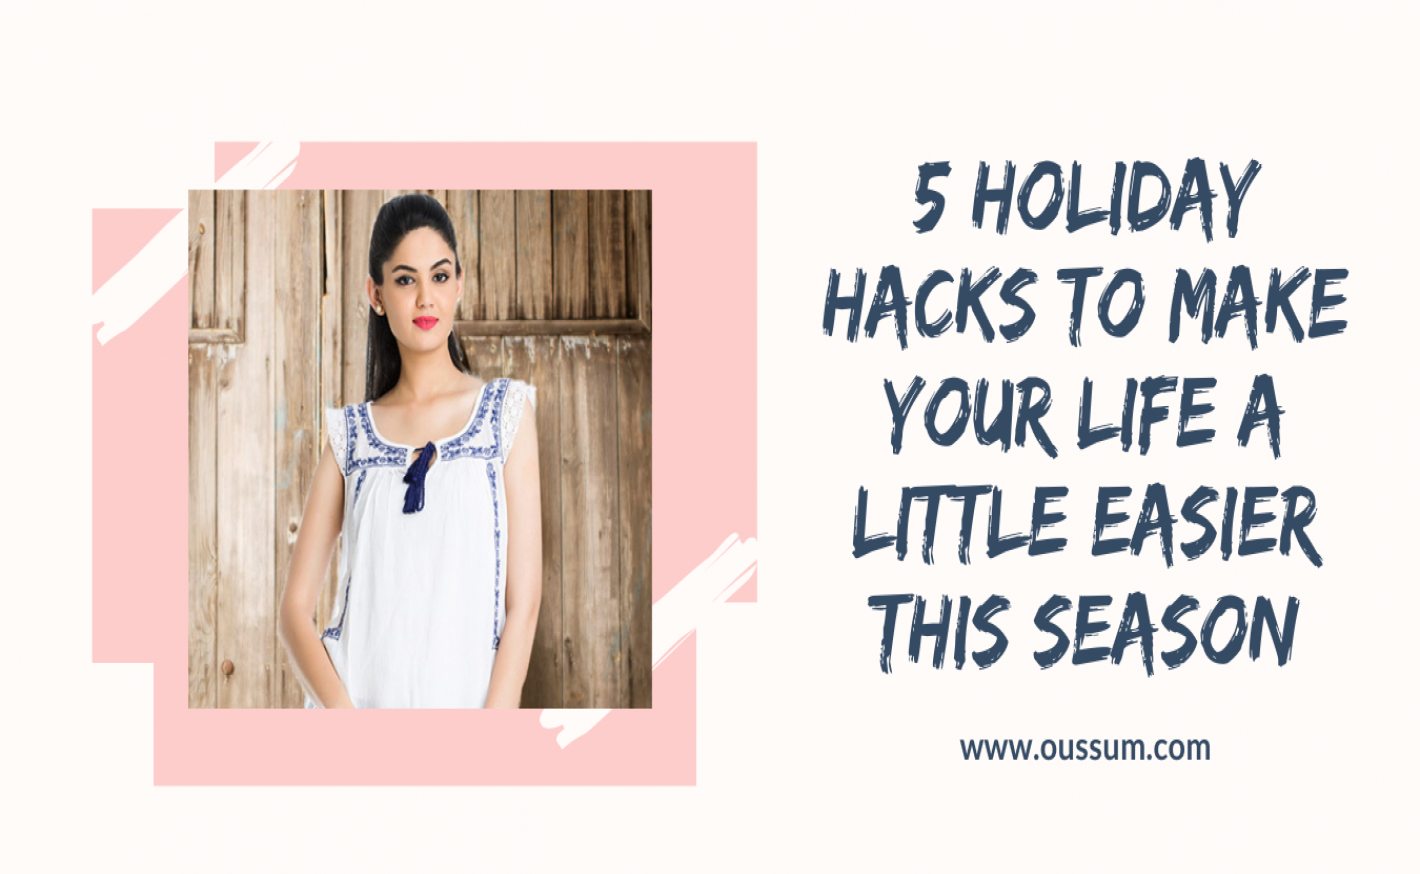 5 Holiday Hacks to Make Your Life a Little Easier This Season